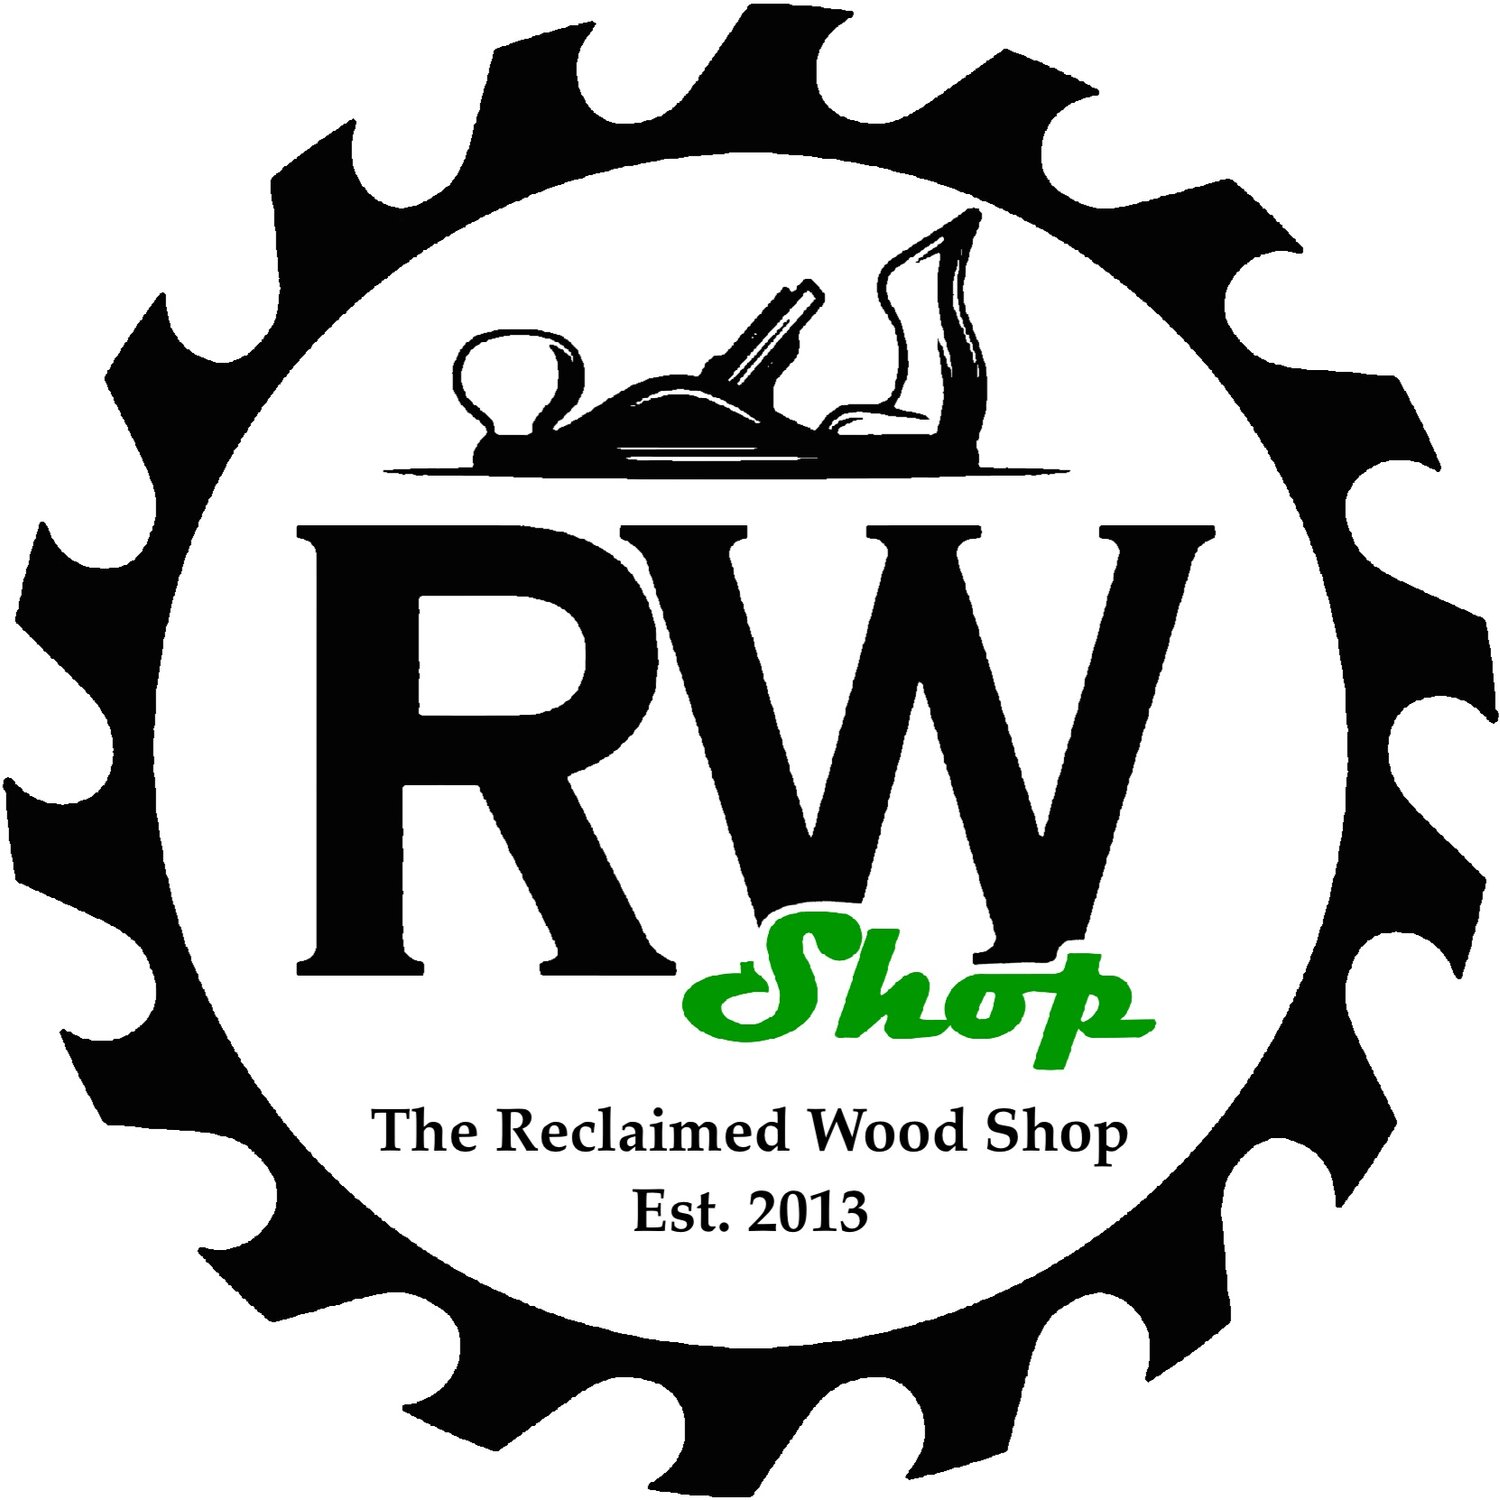 The Reclaimed Wood Shop